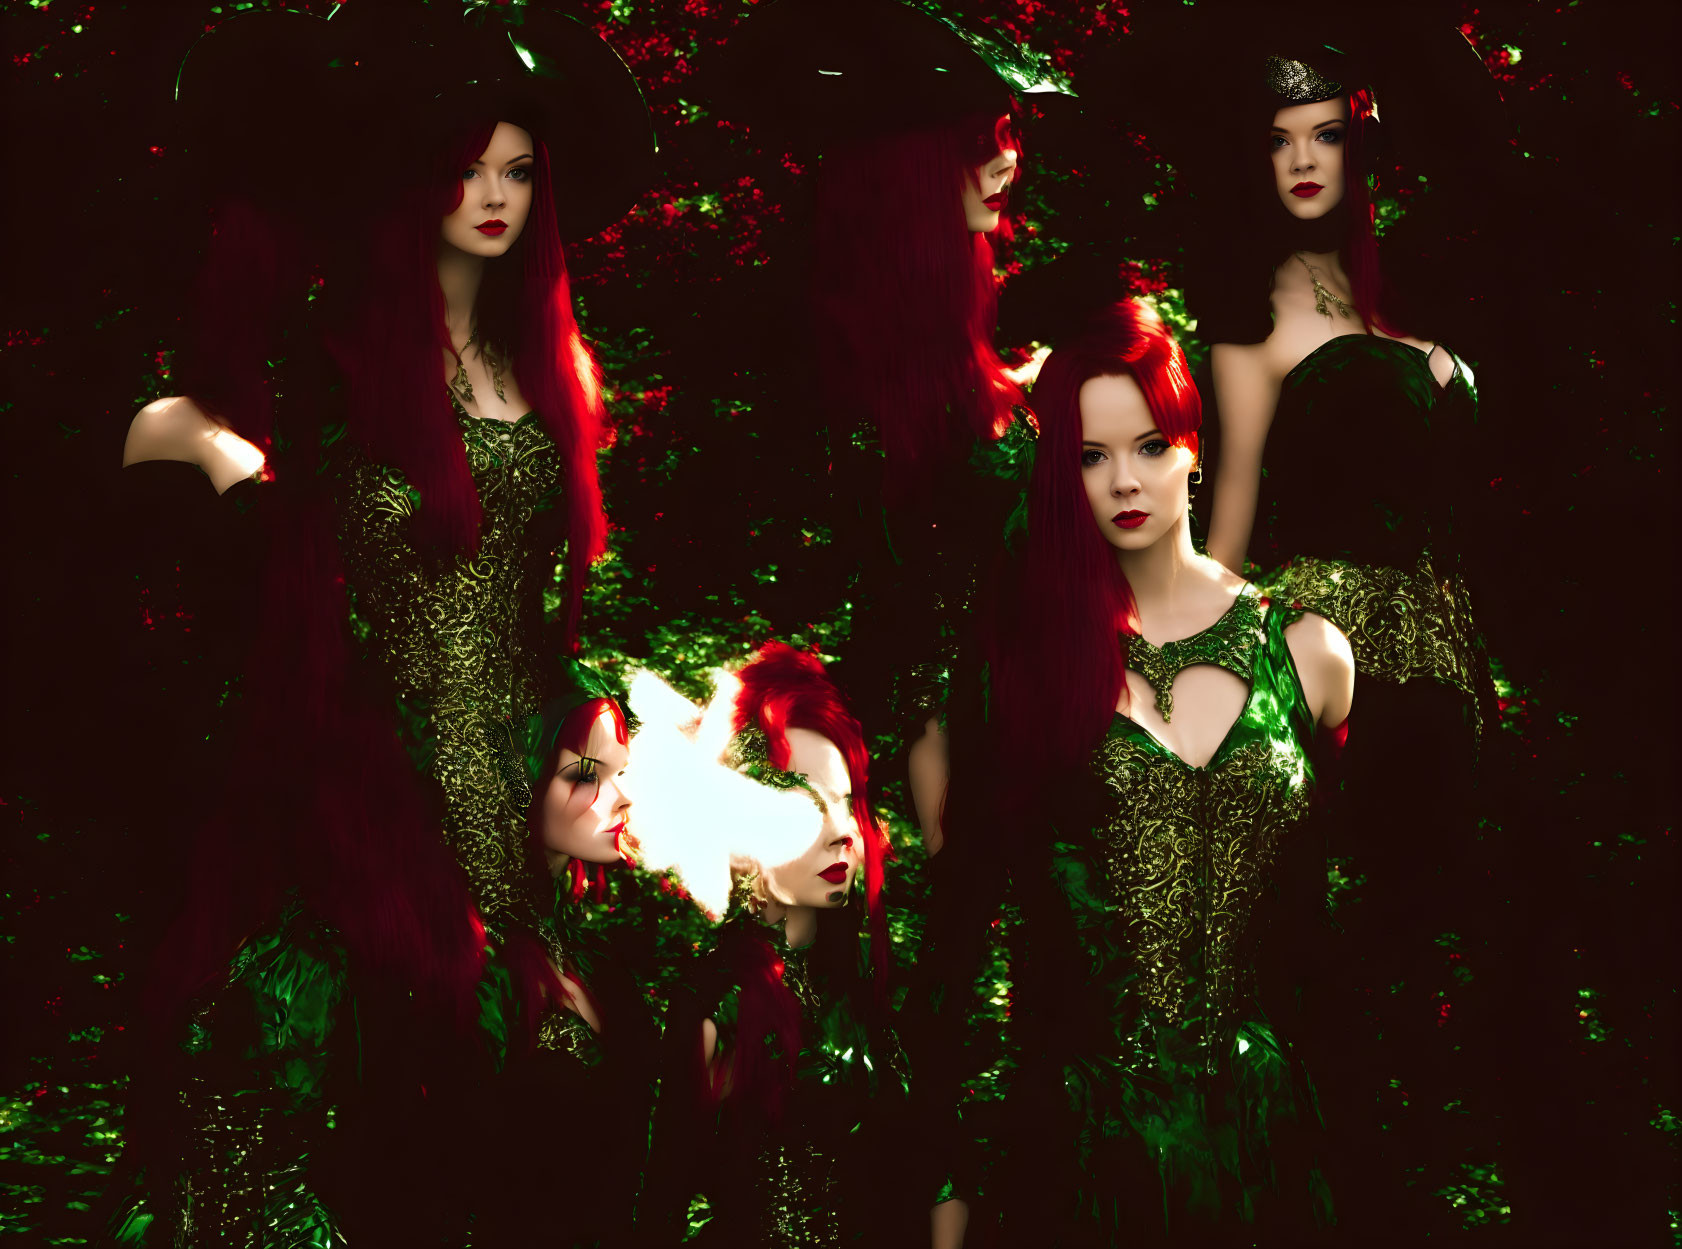 Four red-haired female figures in green dresses and black hats in a dark, moody forest with red